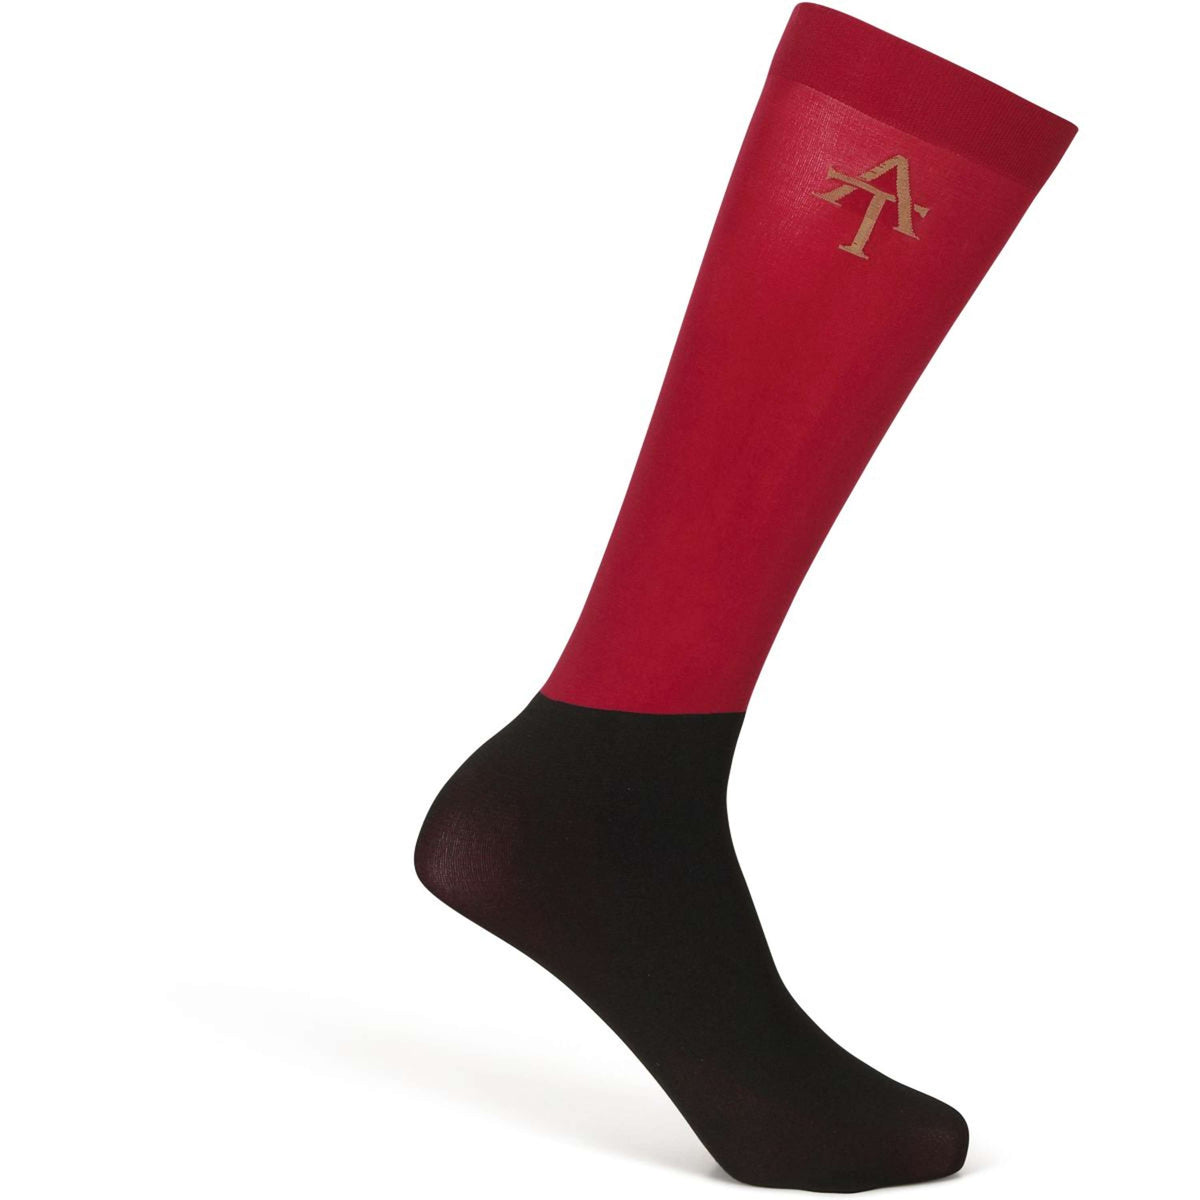 Aubrion by Shires Socken Team Rot